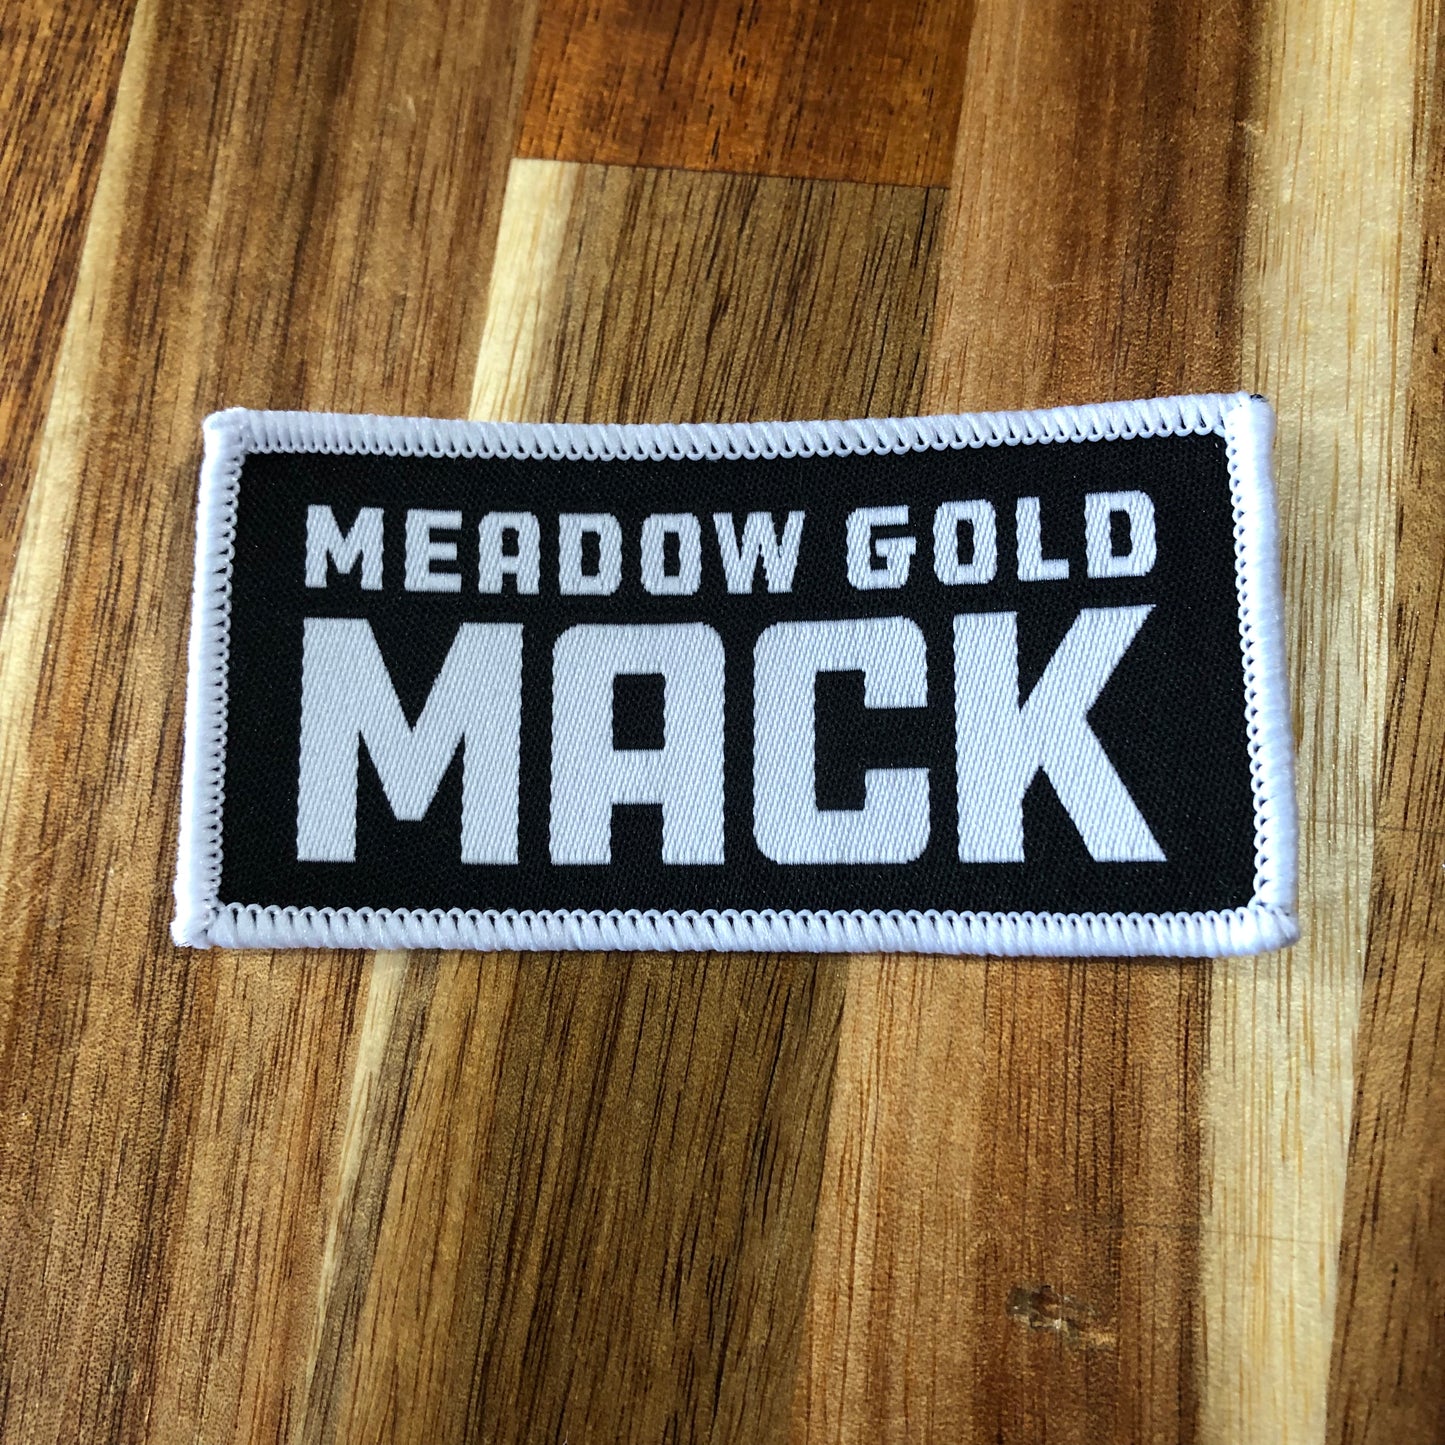 Meadow Gold Mack Patches